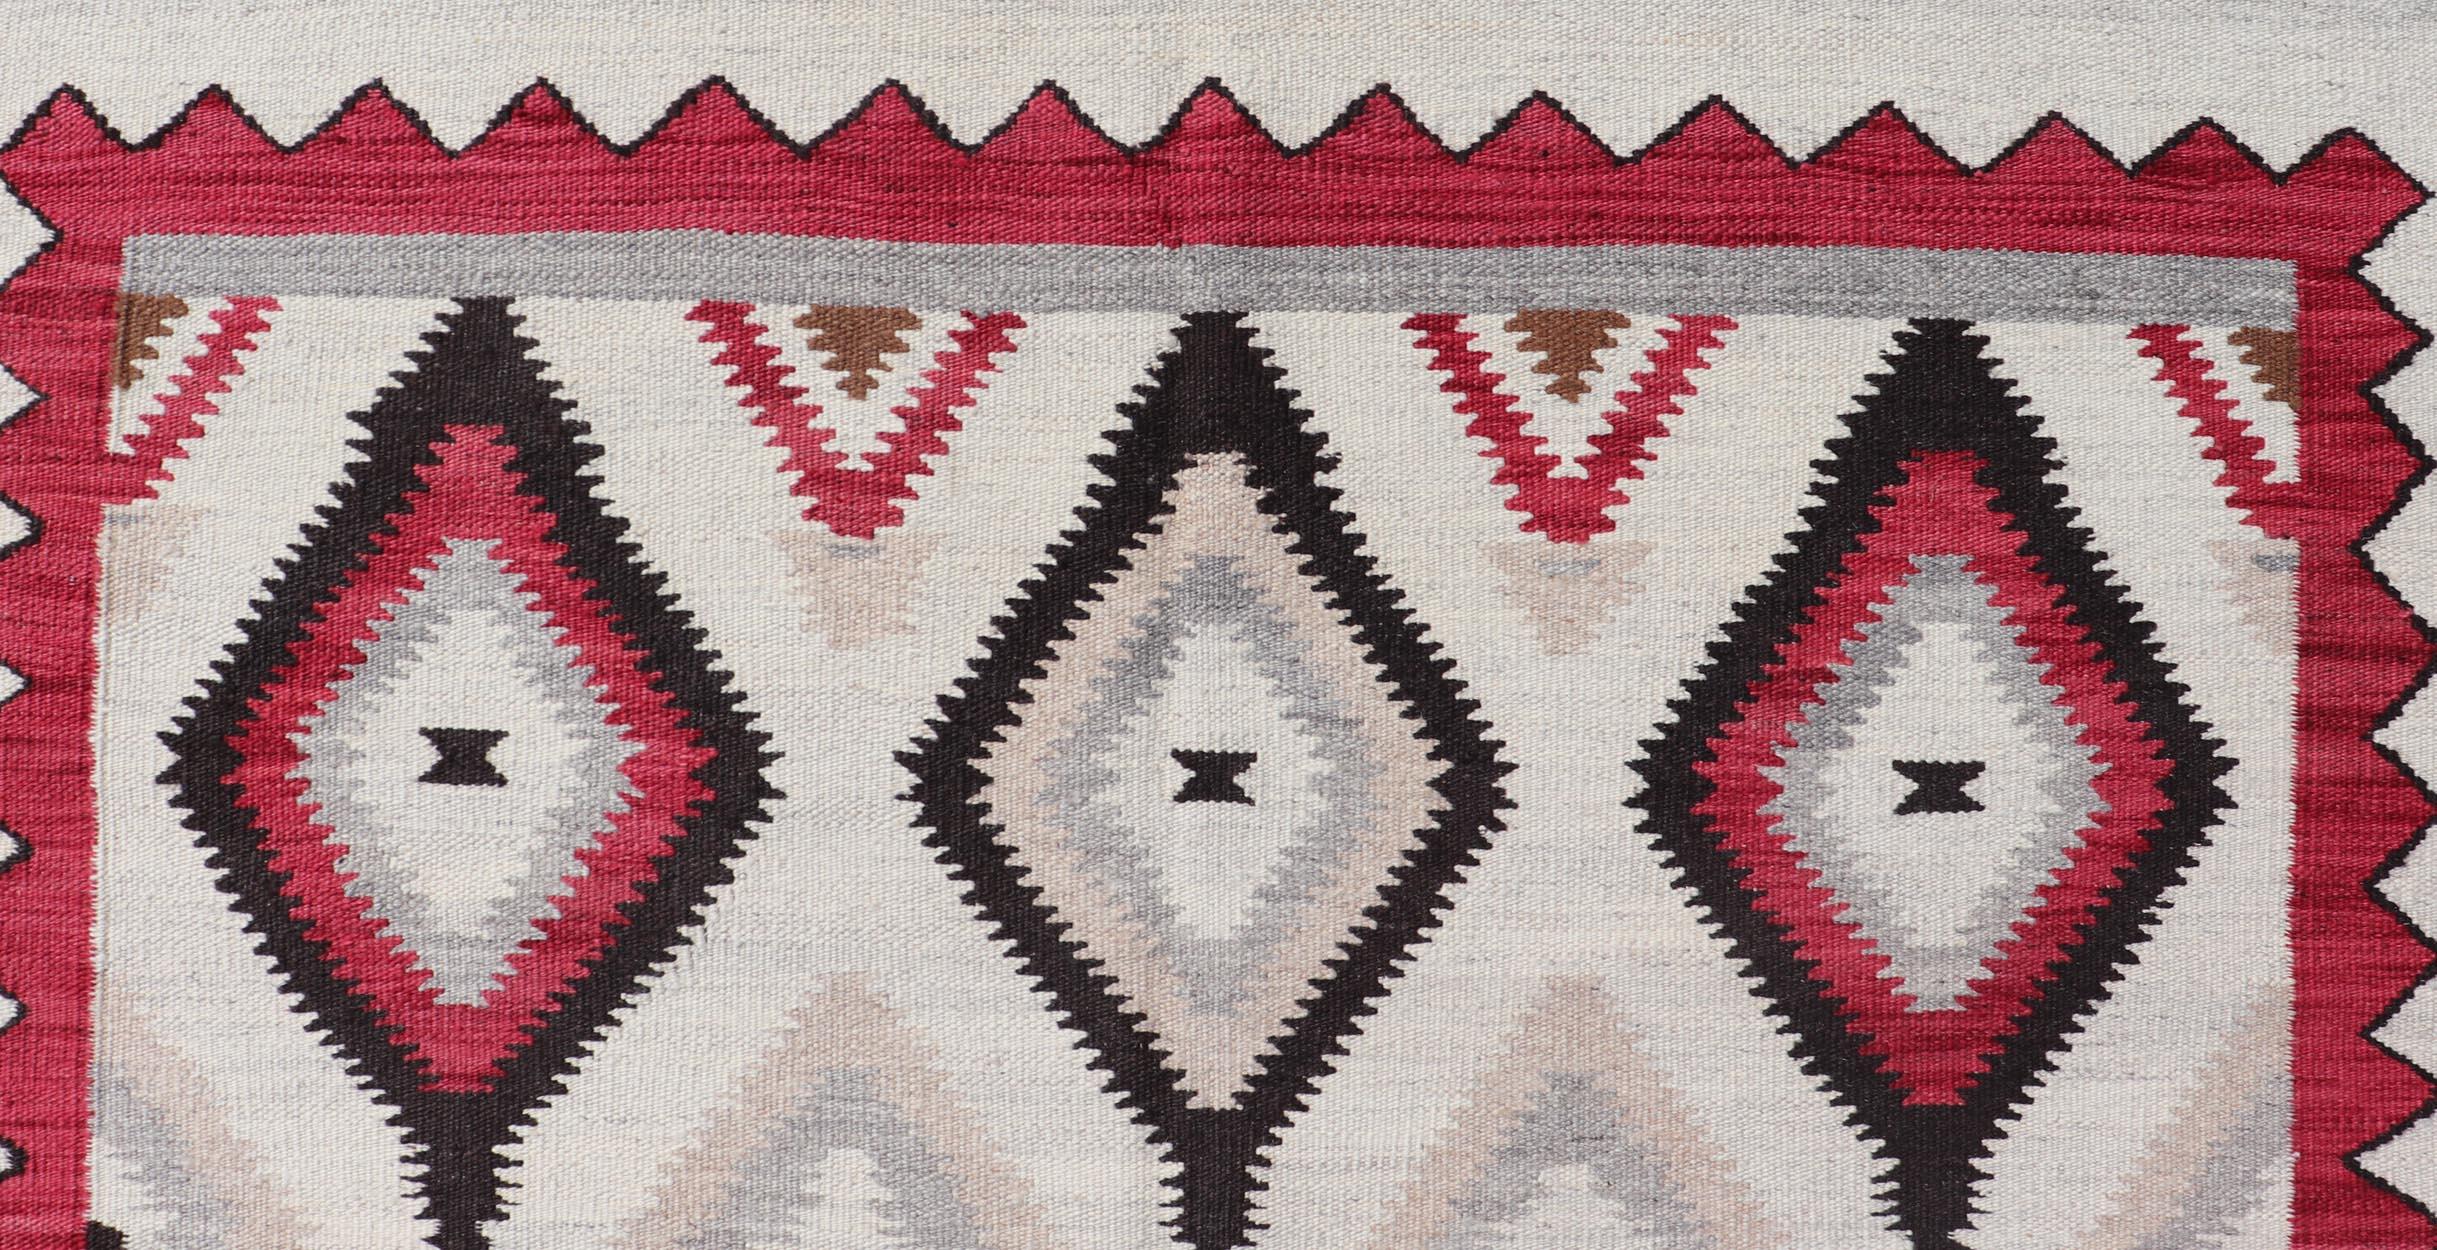 Hand-Woven American Navajo Design Rug with Latticework Tribal Design in Red, Black and Gray For Sale